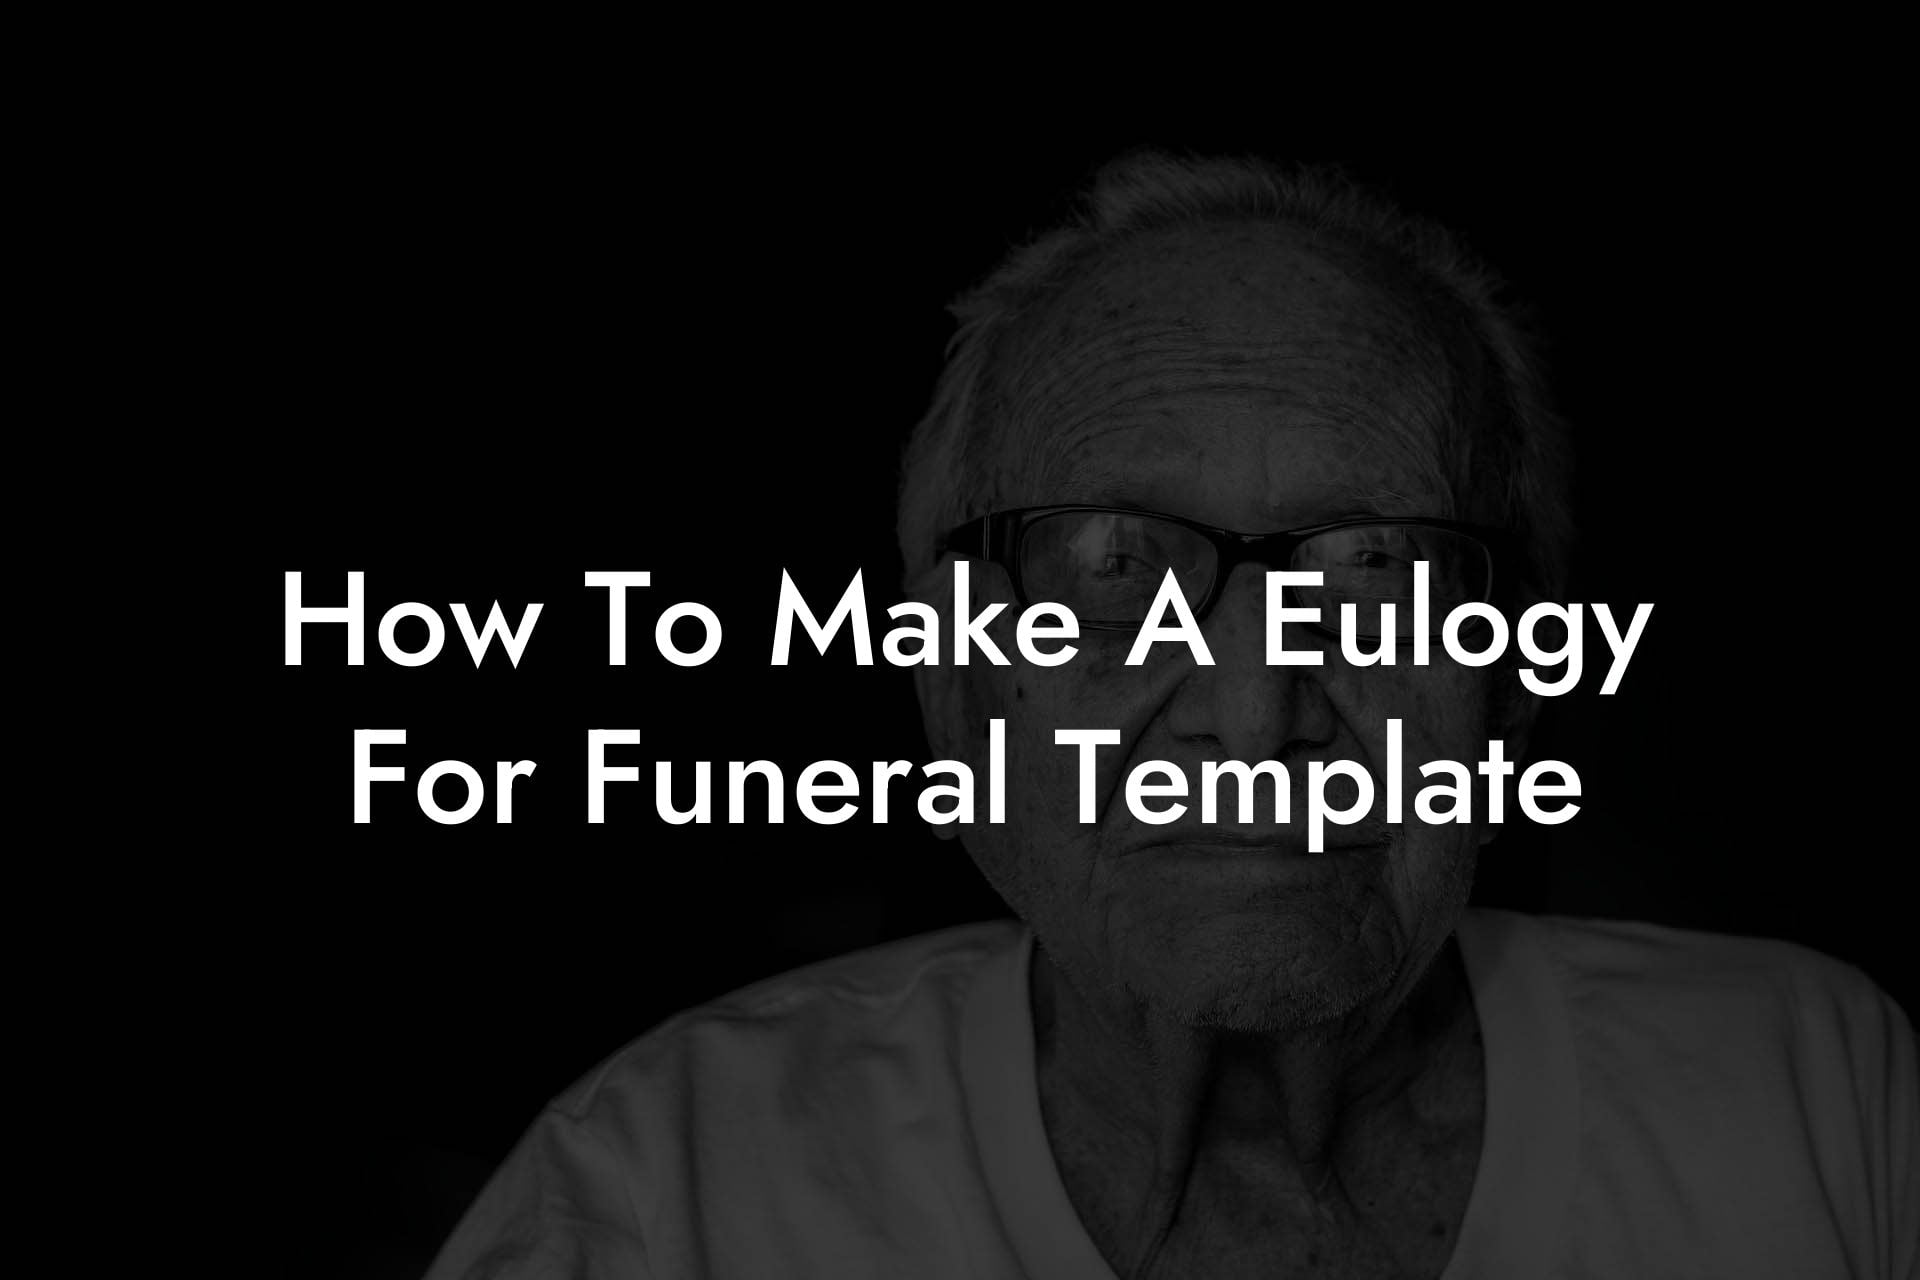 How To Make A Eulogy For Funeral Template